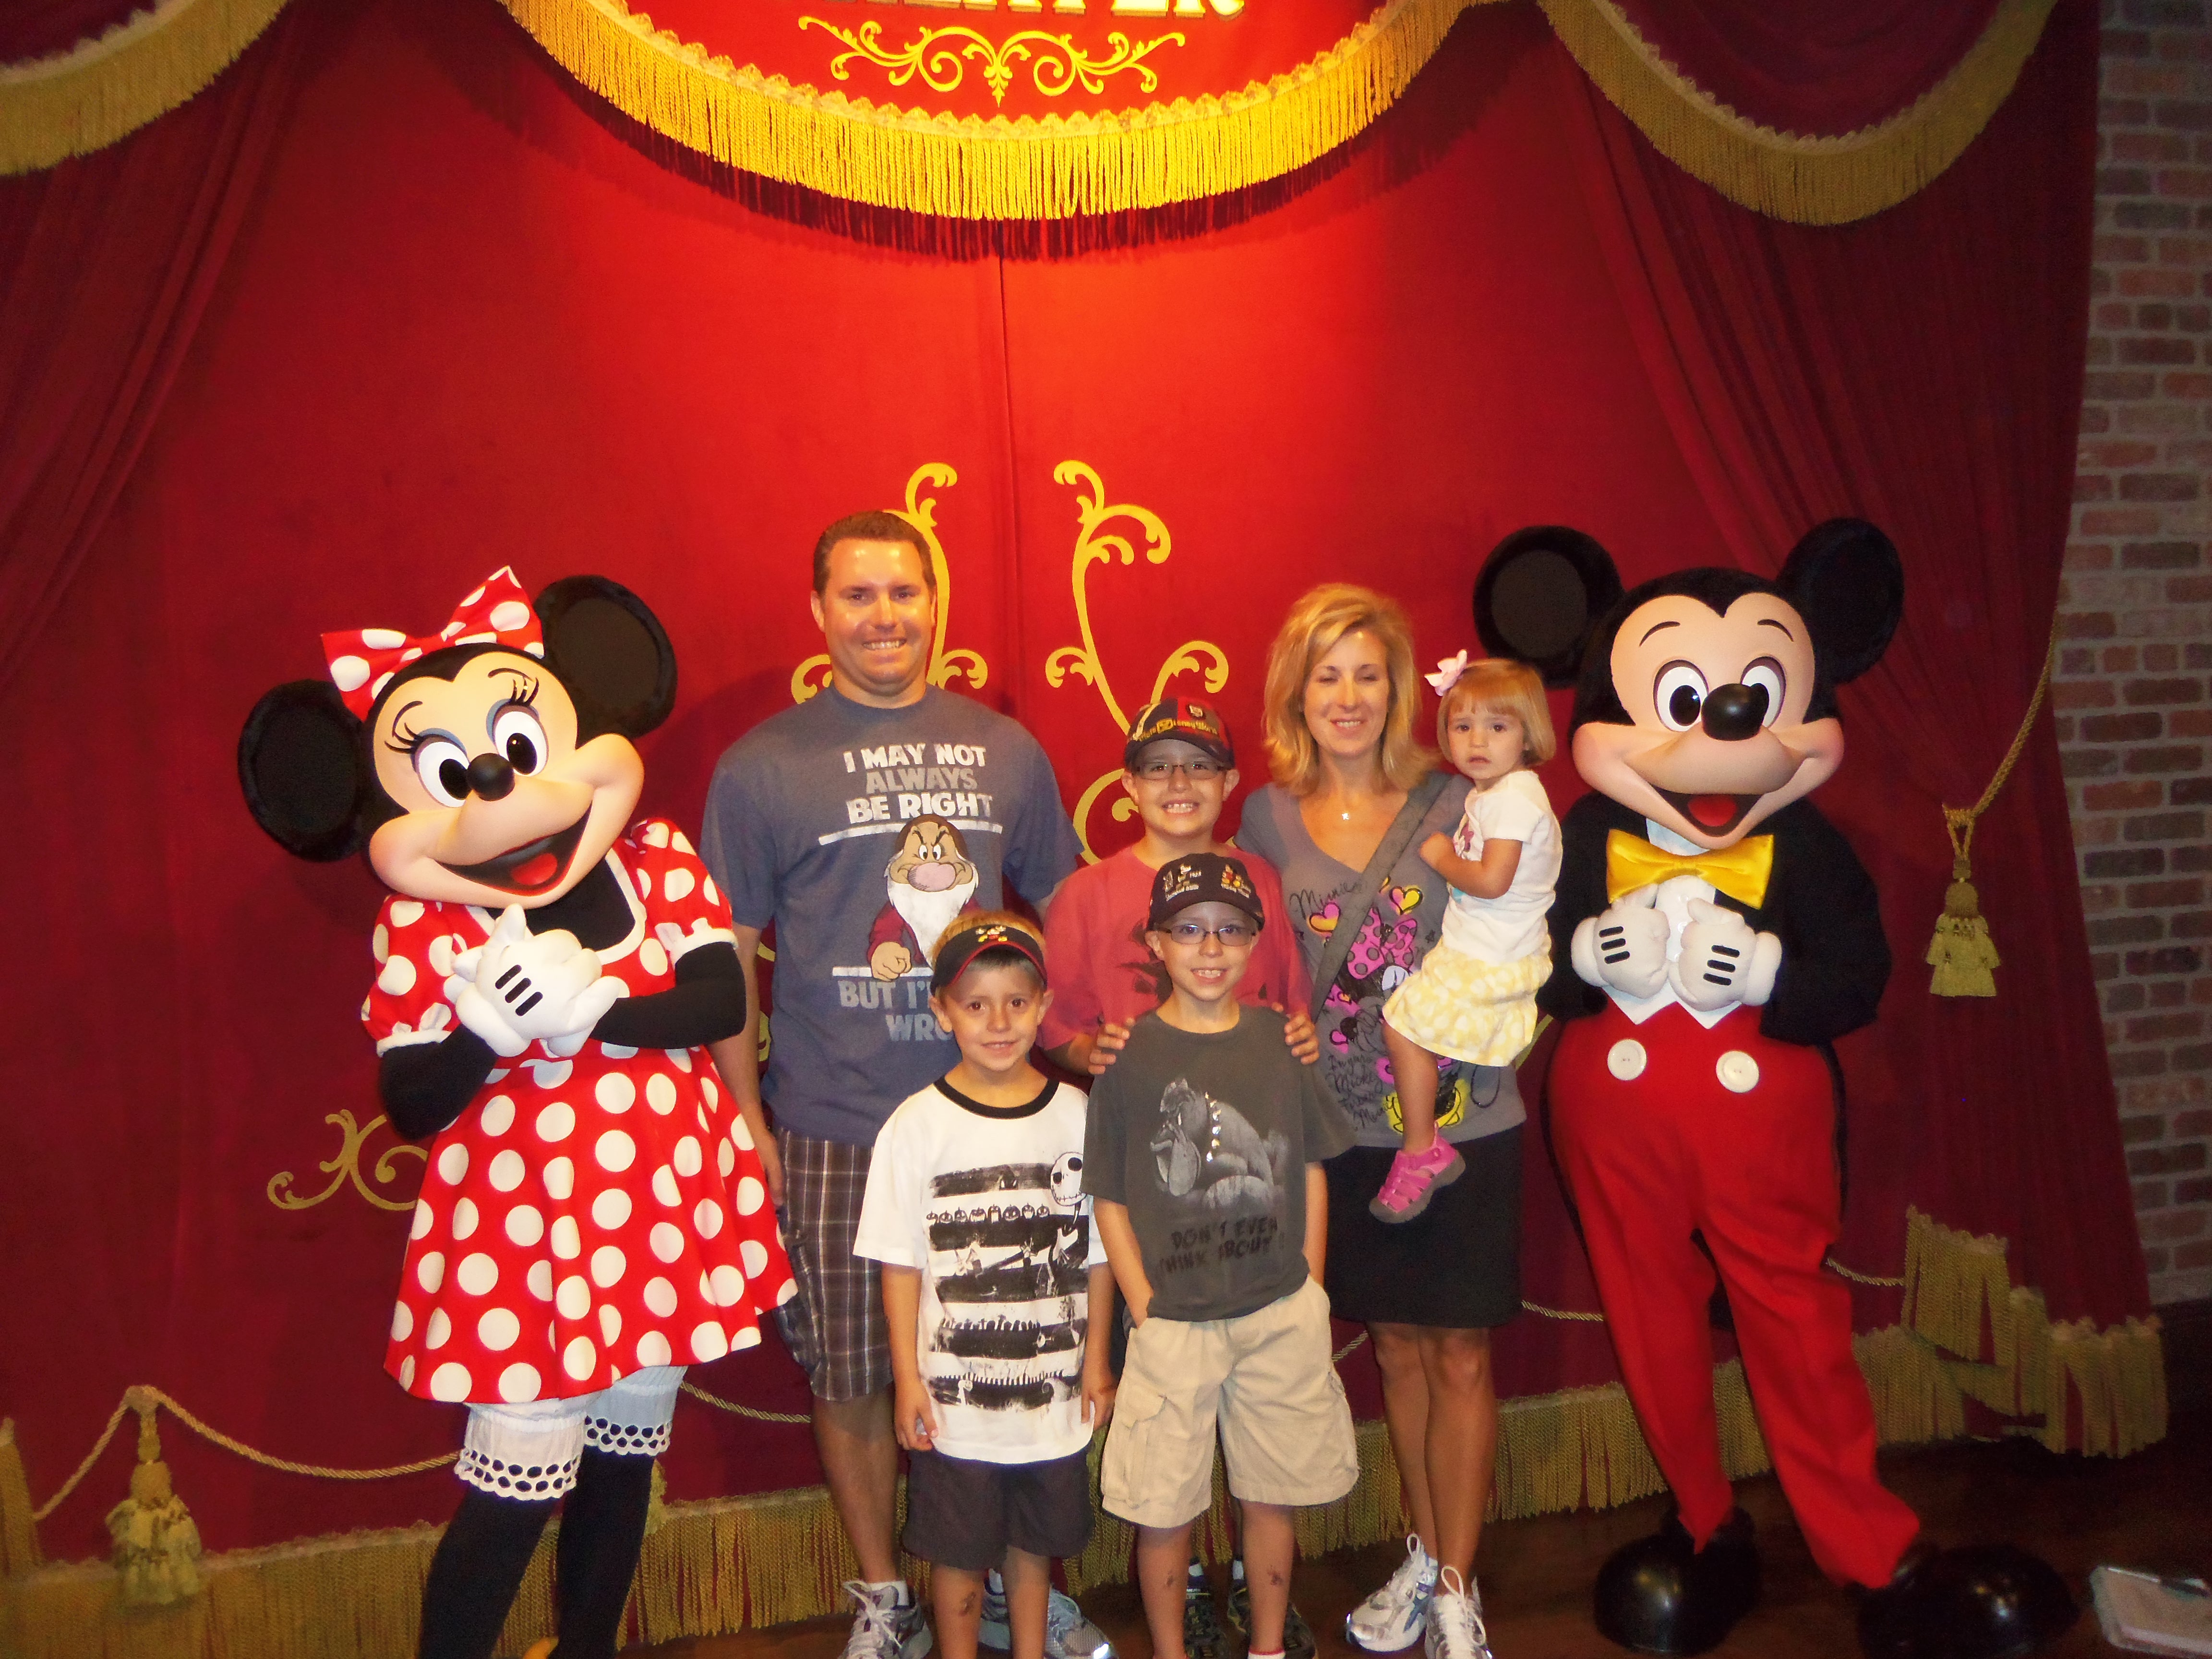 The whole family joined in for a meet with Mickey and Minnie. Minnie has since moved out to Pete's Silly Sideshow.